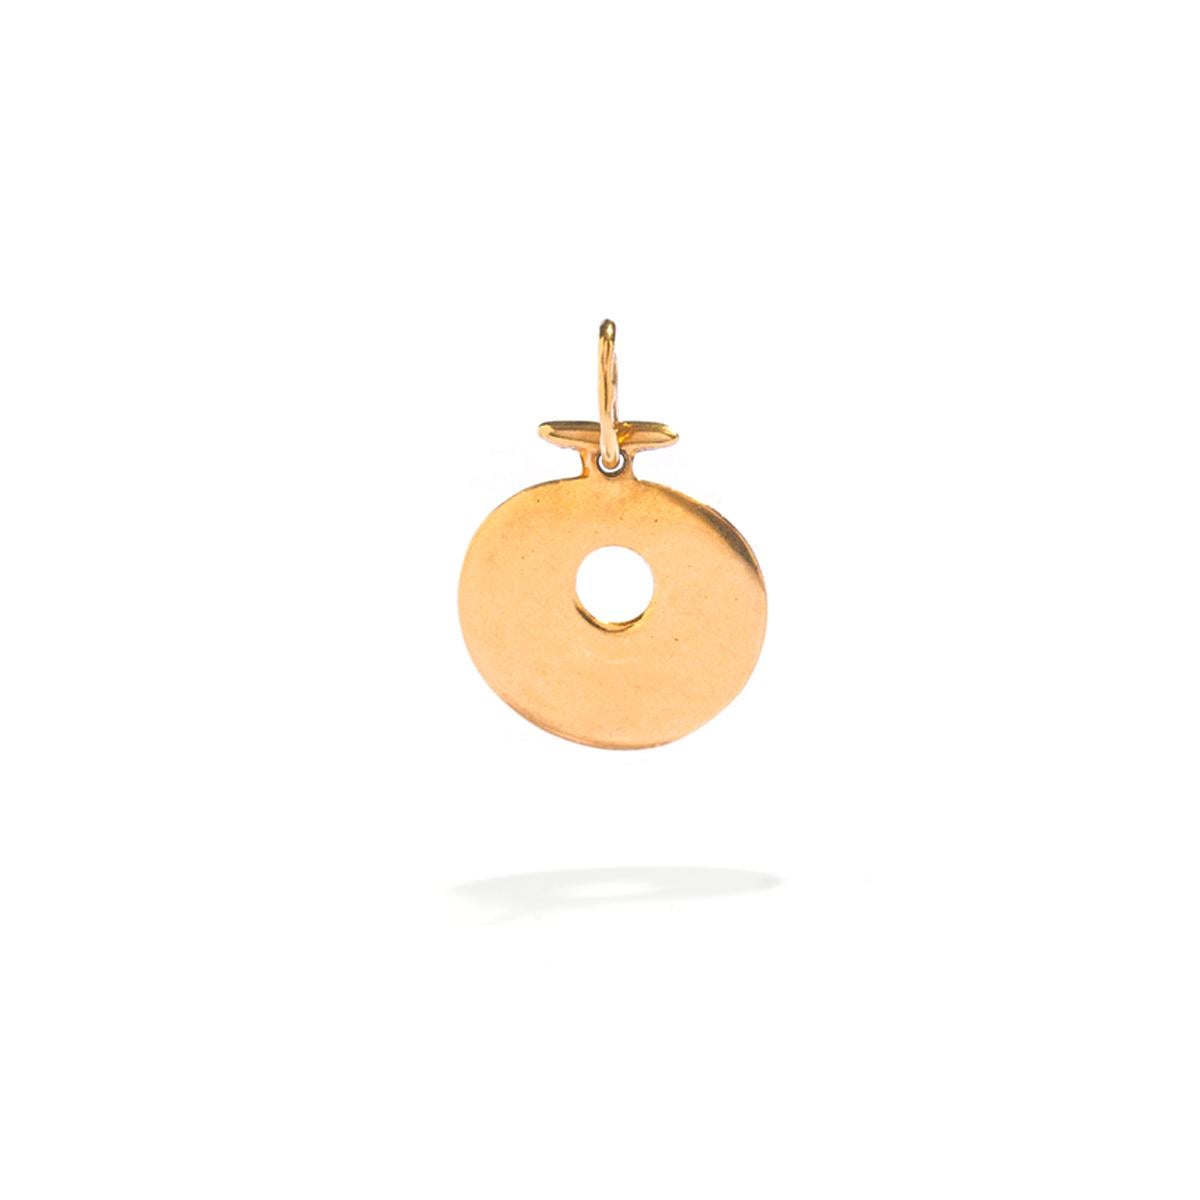 Symbolic Egyptian revival Round disc Yellow Gold 18k Pendant Charm.

Total height: 0.79 inch (2.00 centimeters) including bail.
Total weight: 2.00 grams.